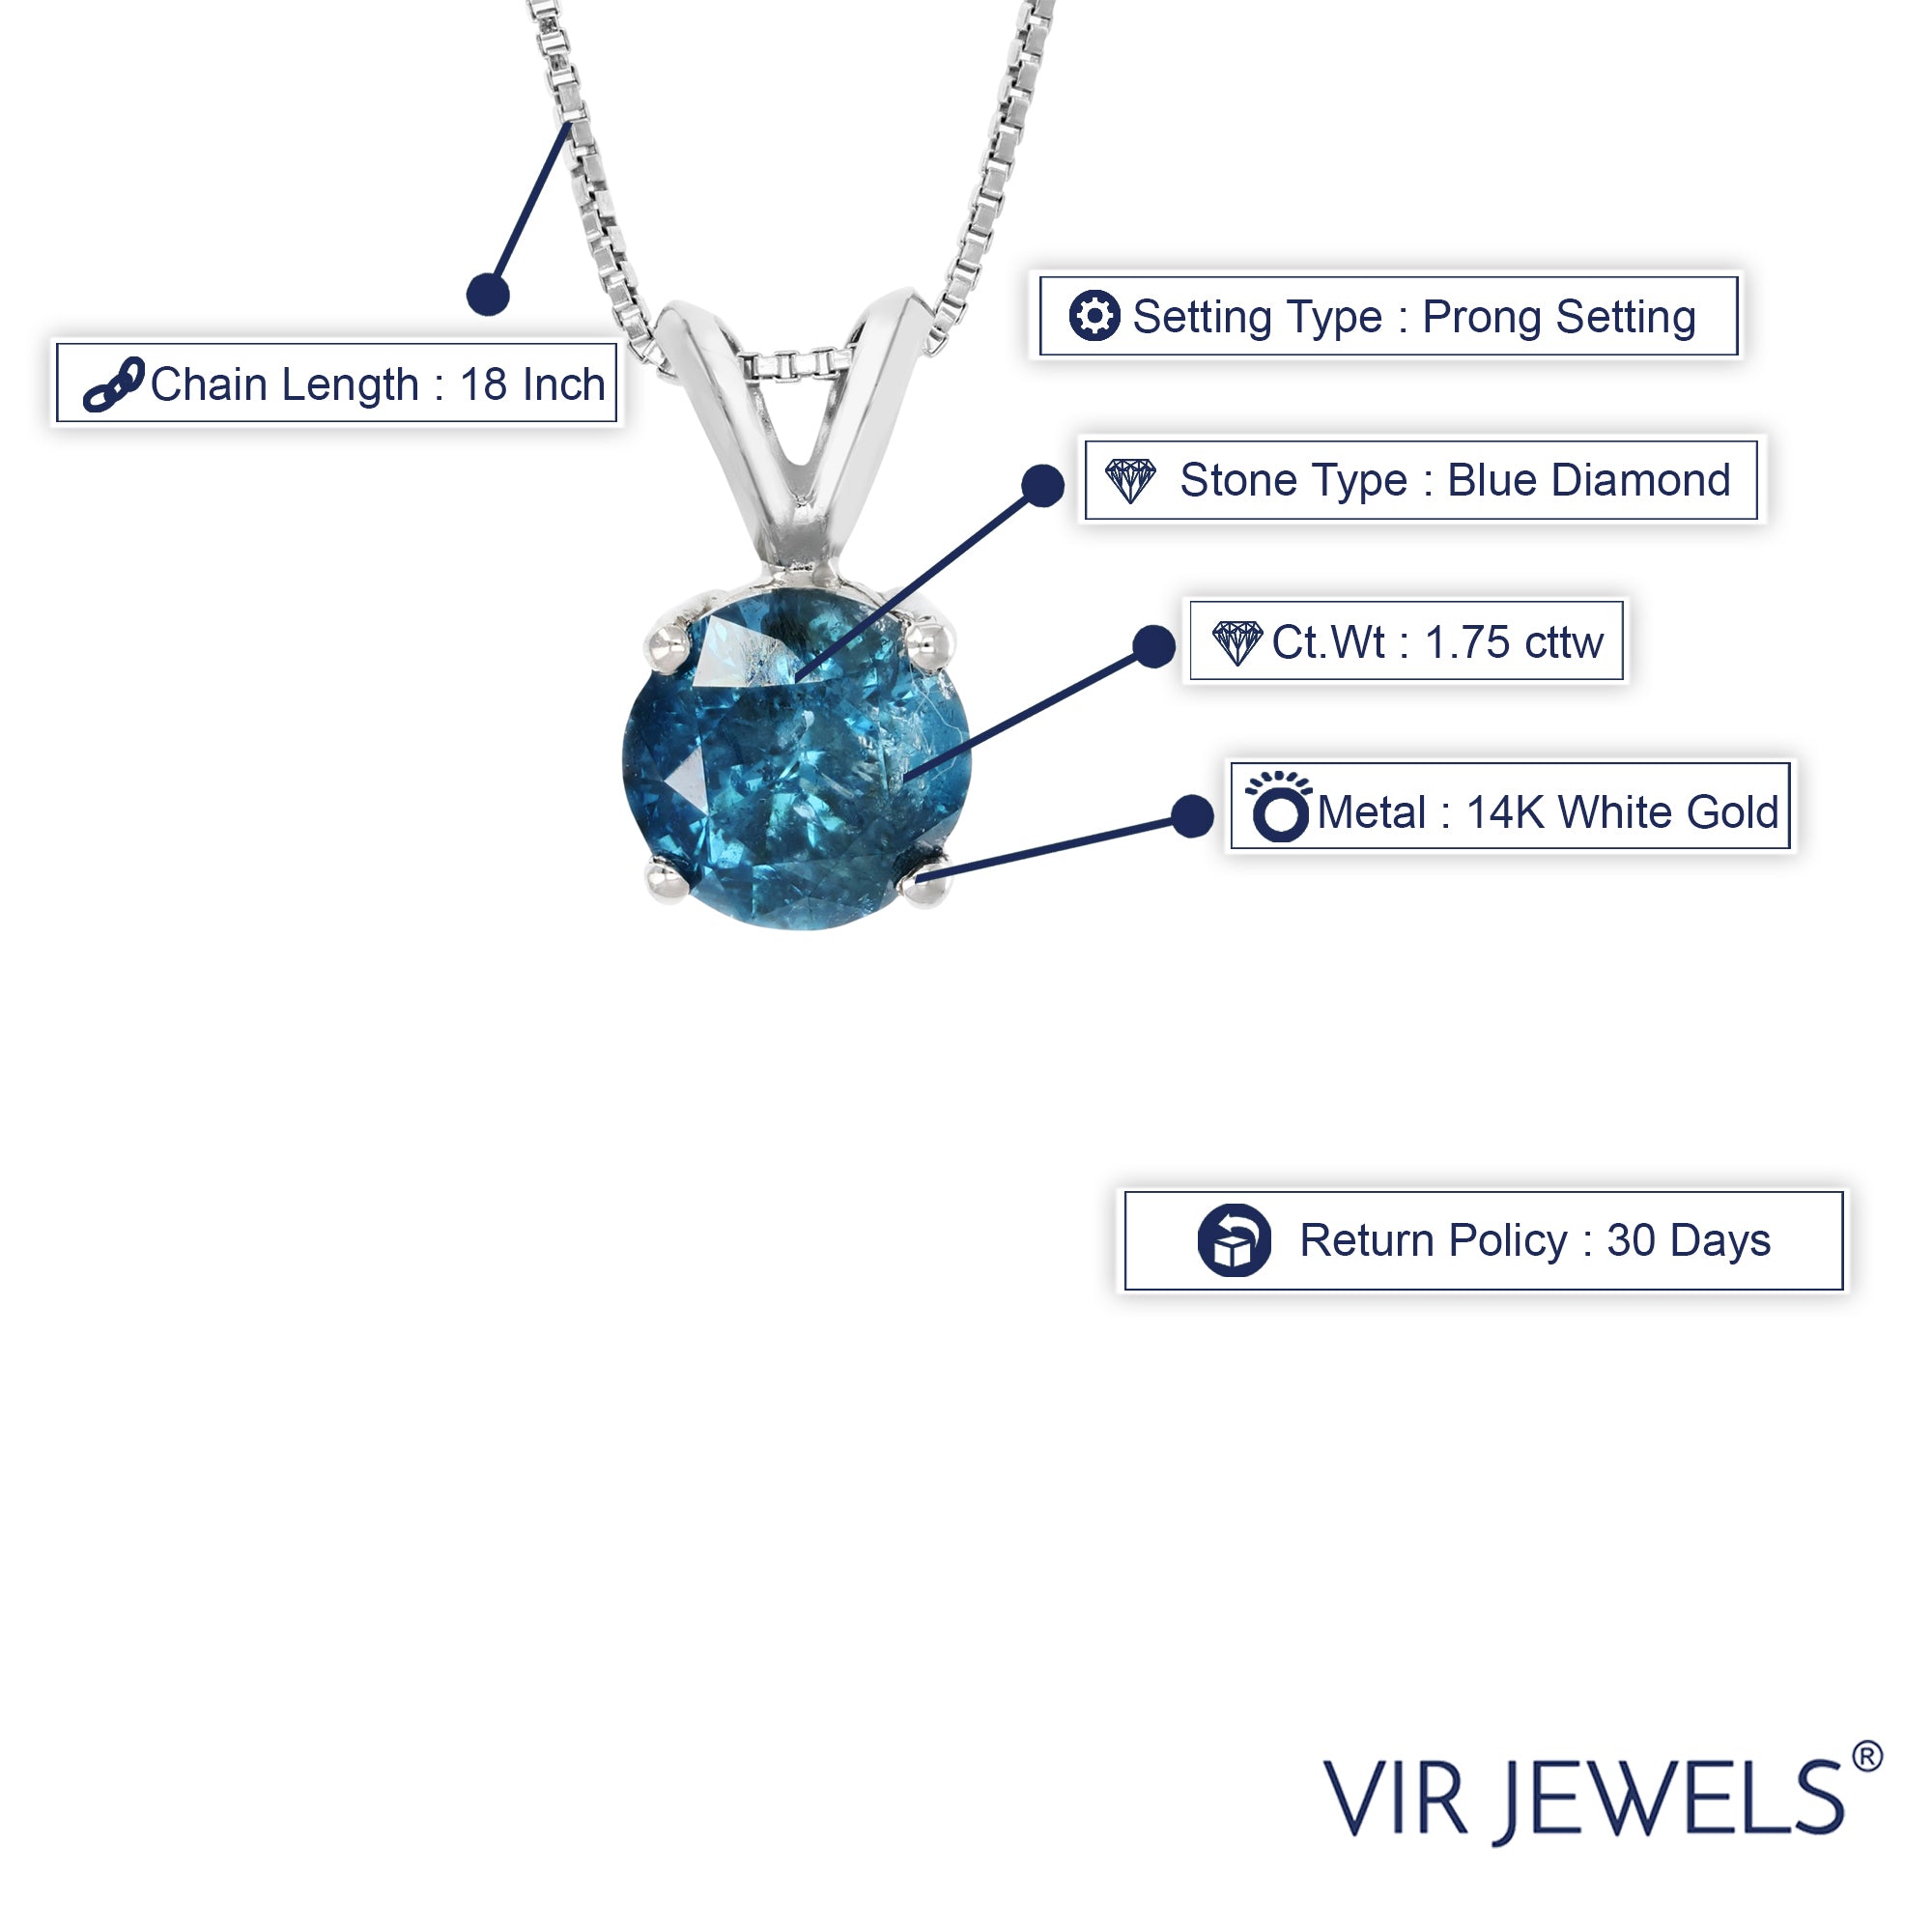 1.75 cttw Diamond Pendant, Blue Diamond Solitaire Pendant Necklace for Women in 14K White Gold with 18 Inch Chain, Prong Setting